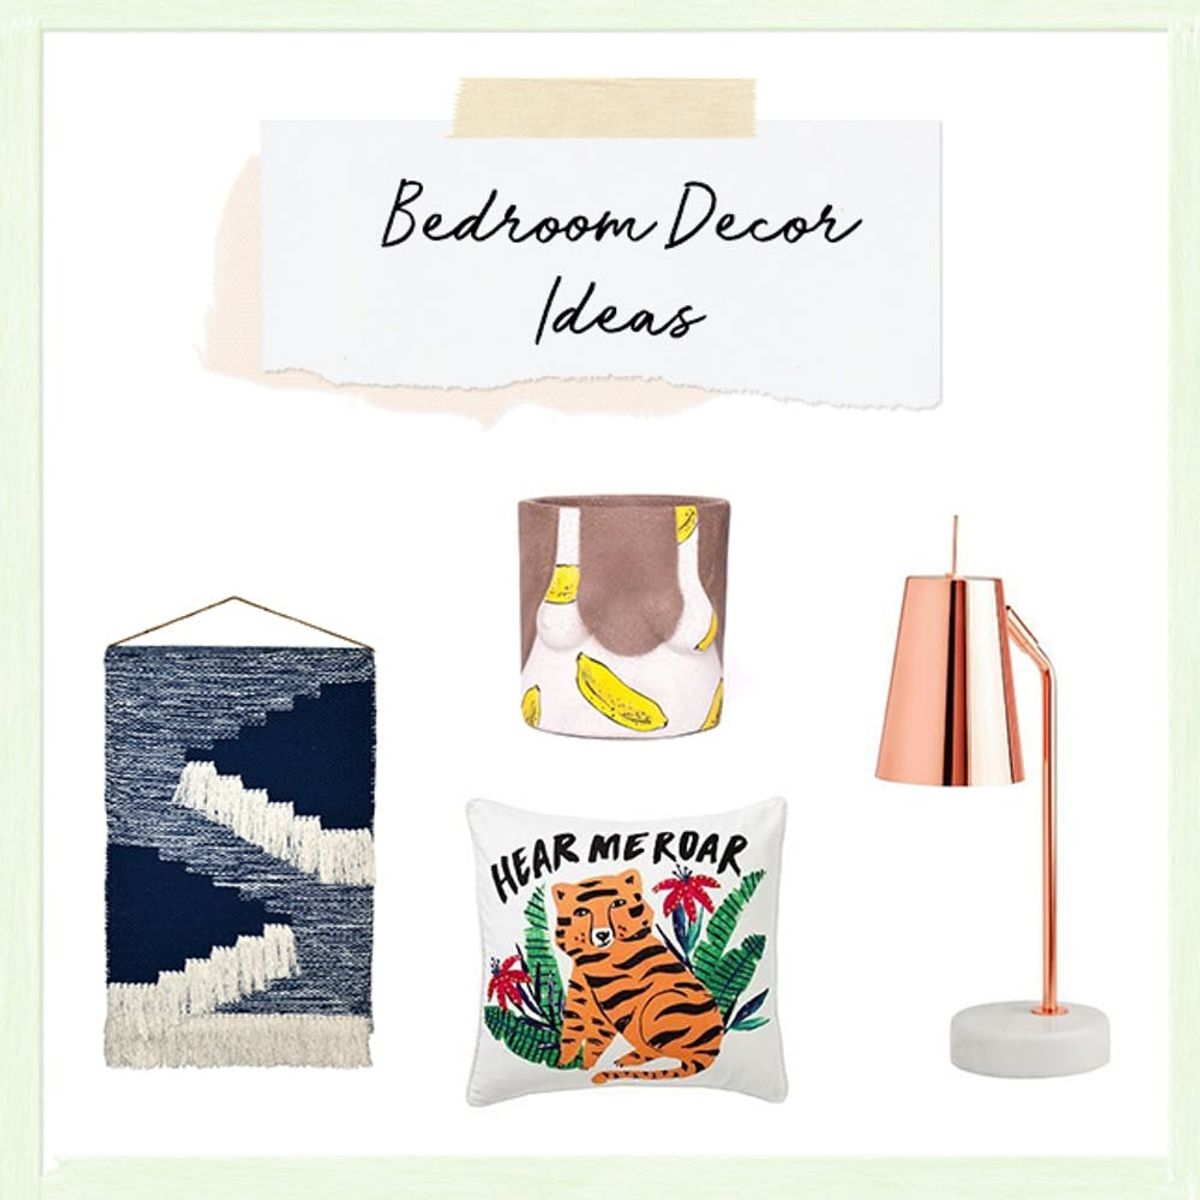 3 Ways to Spruce Up Your Bedroom for Summer